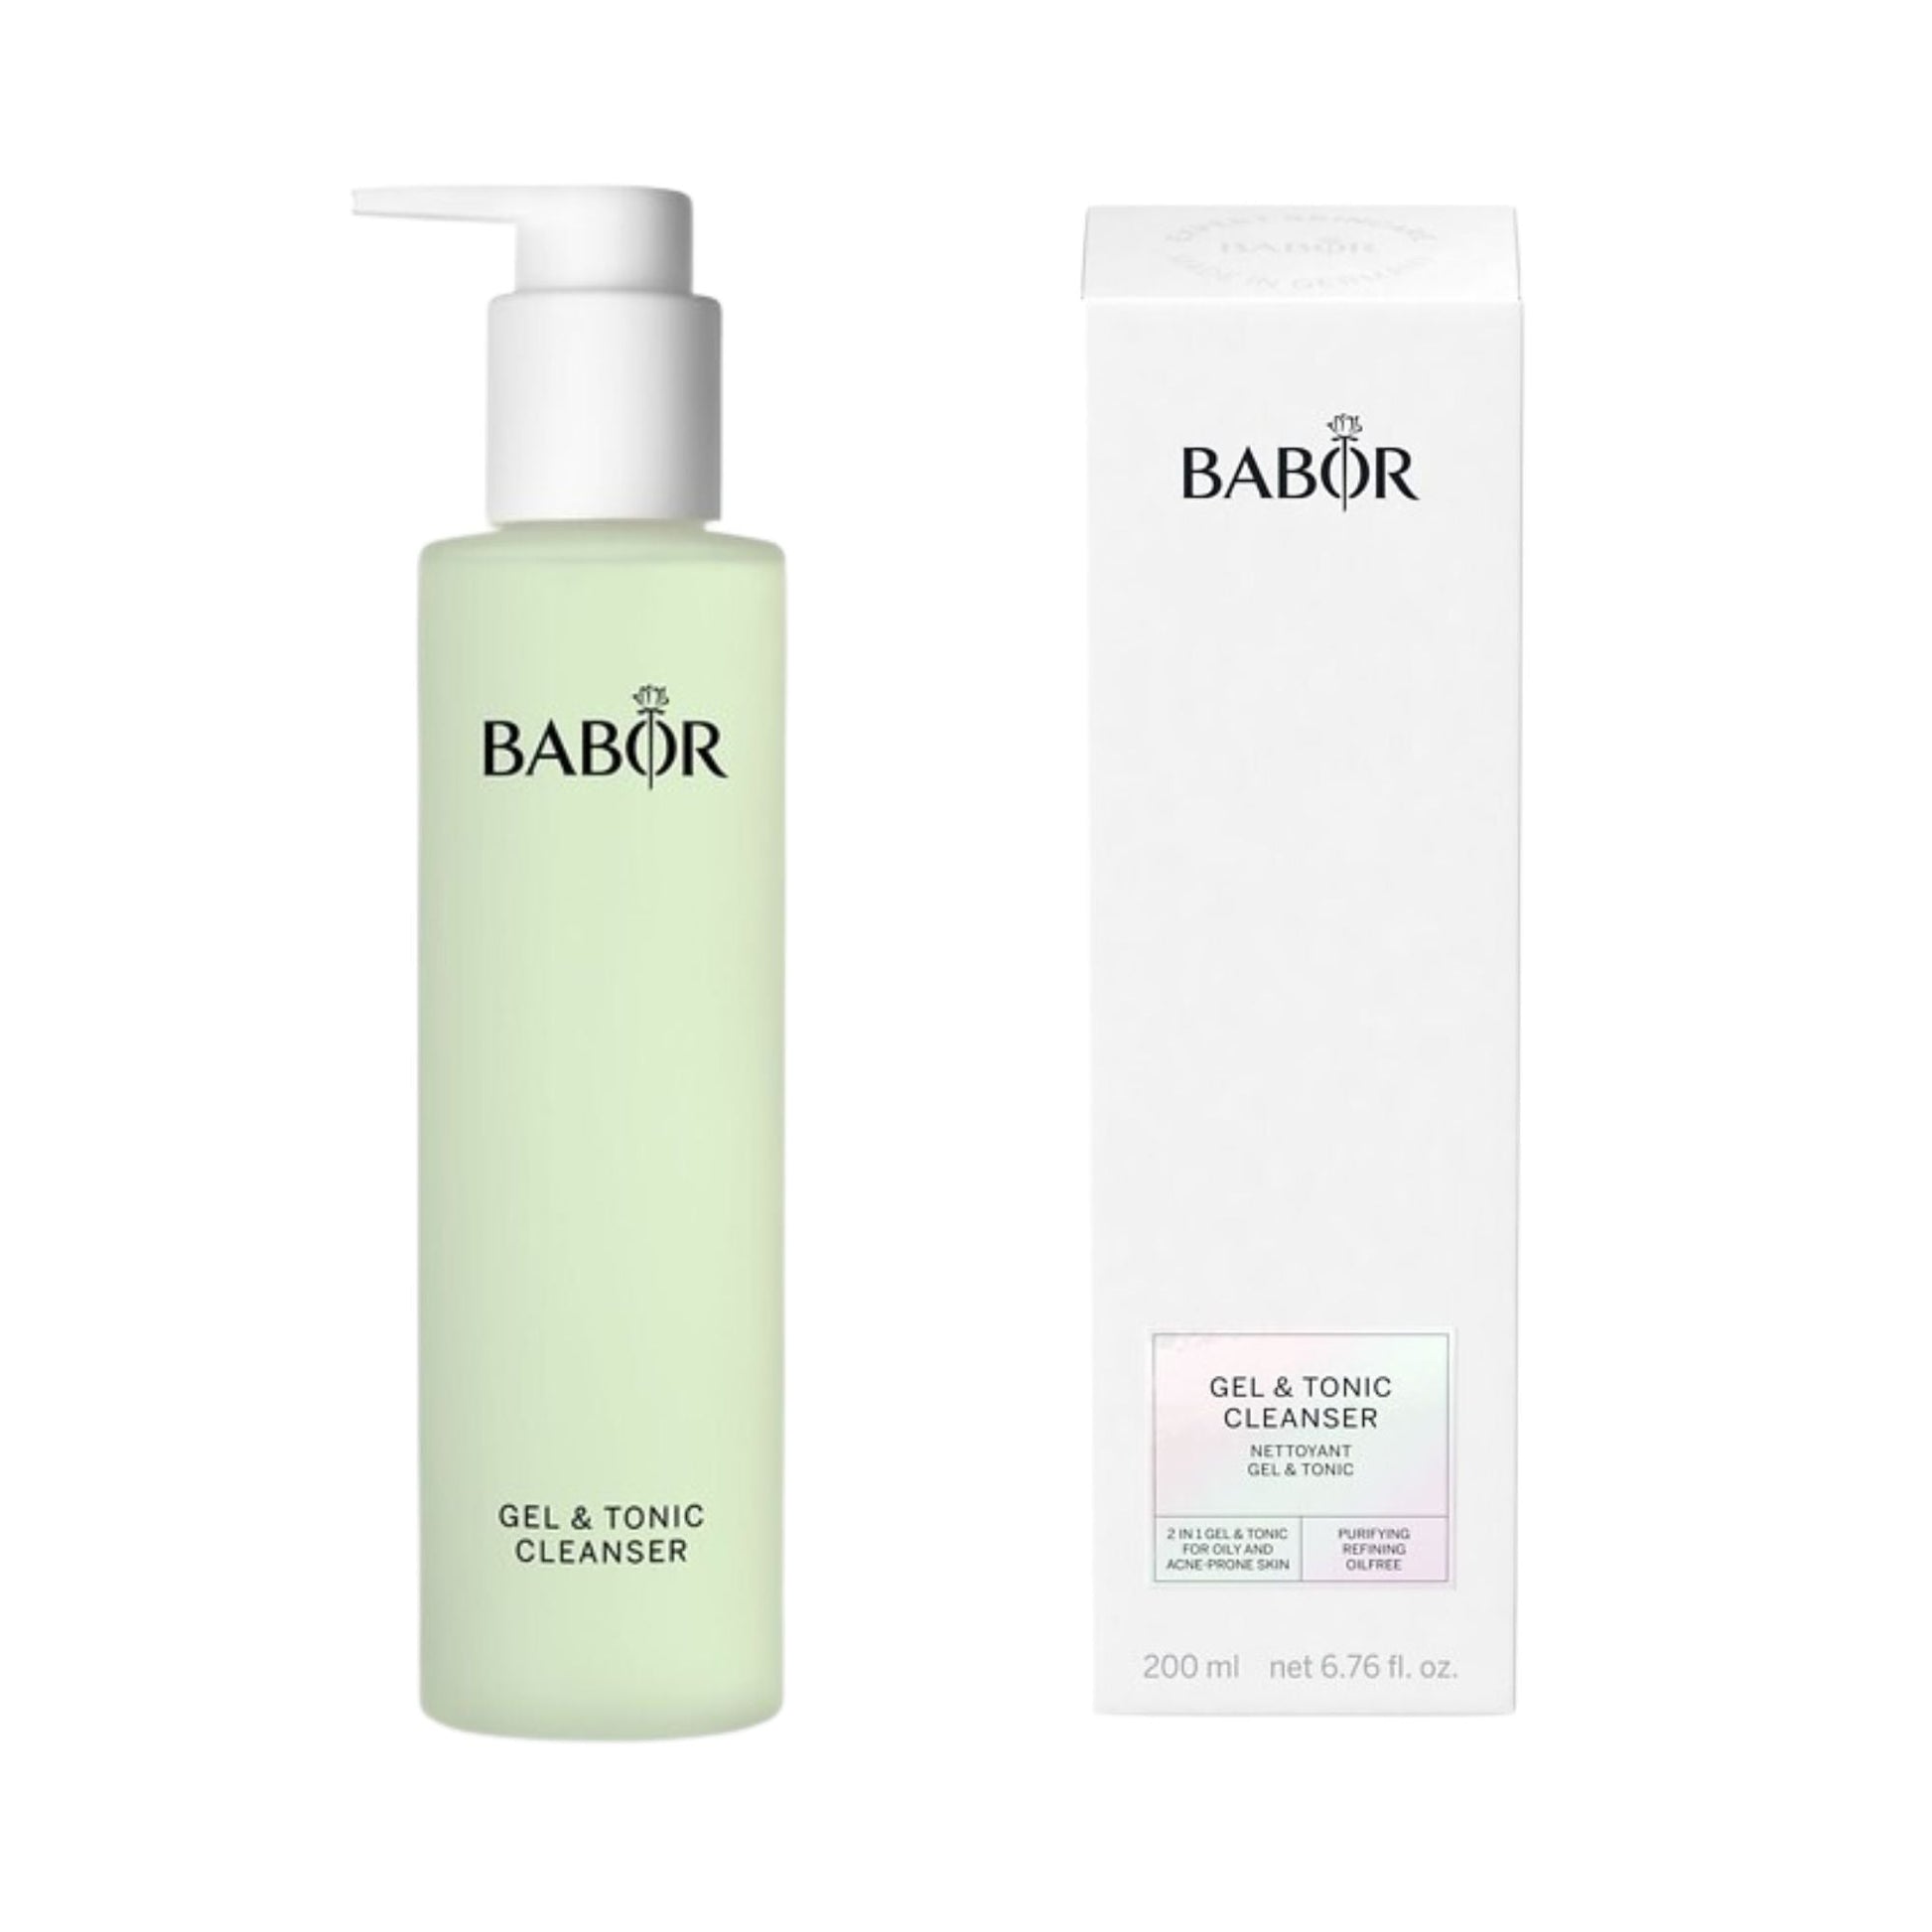 CLEANSING Gel & Tonic Cleanser BABOR - Šamponi.si